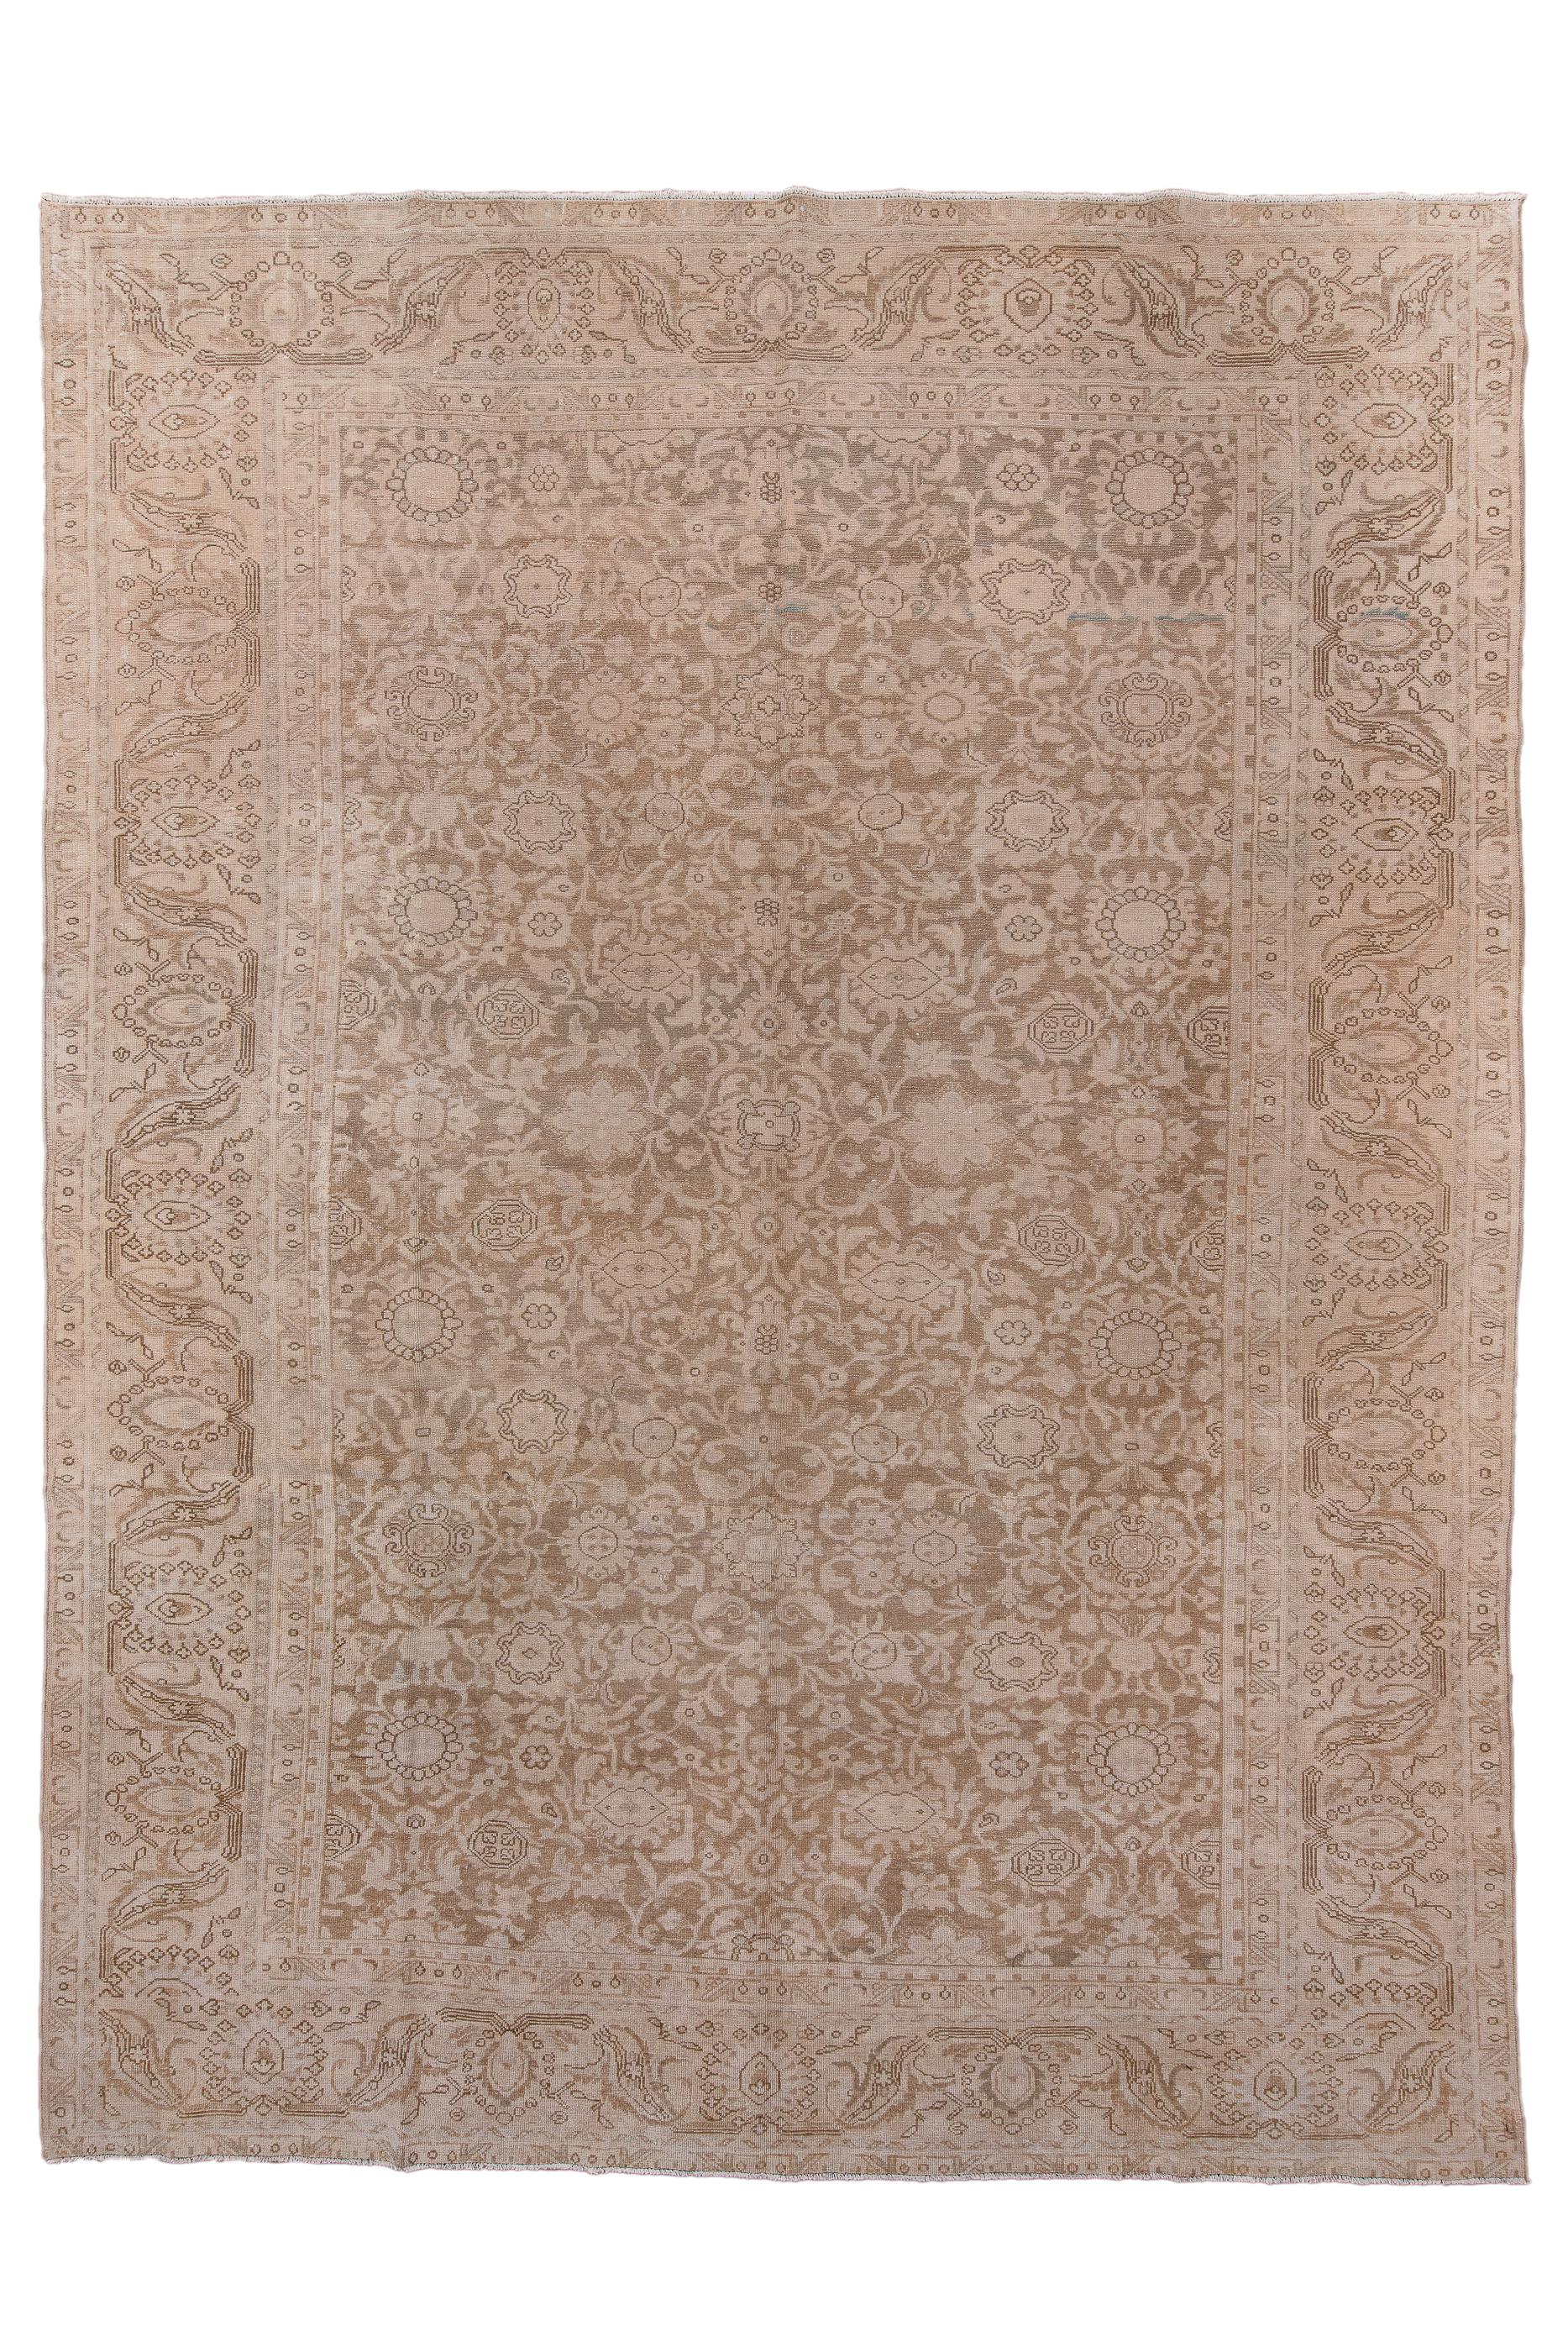 Malayer production exploded in terms of numbers and large sizes in the early 20th century in response to increasing export demand. Hence was born, as here, the “Mahalayer” carpet with the soft red field of the Mahal and an allover pattern including